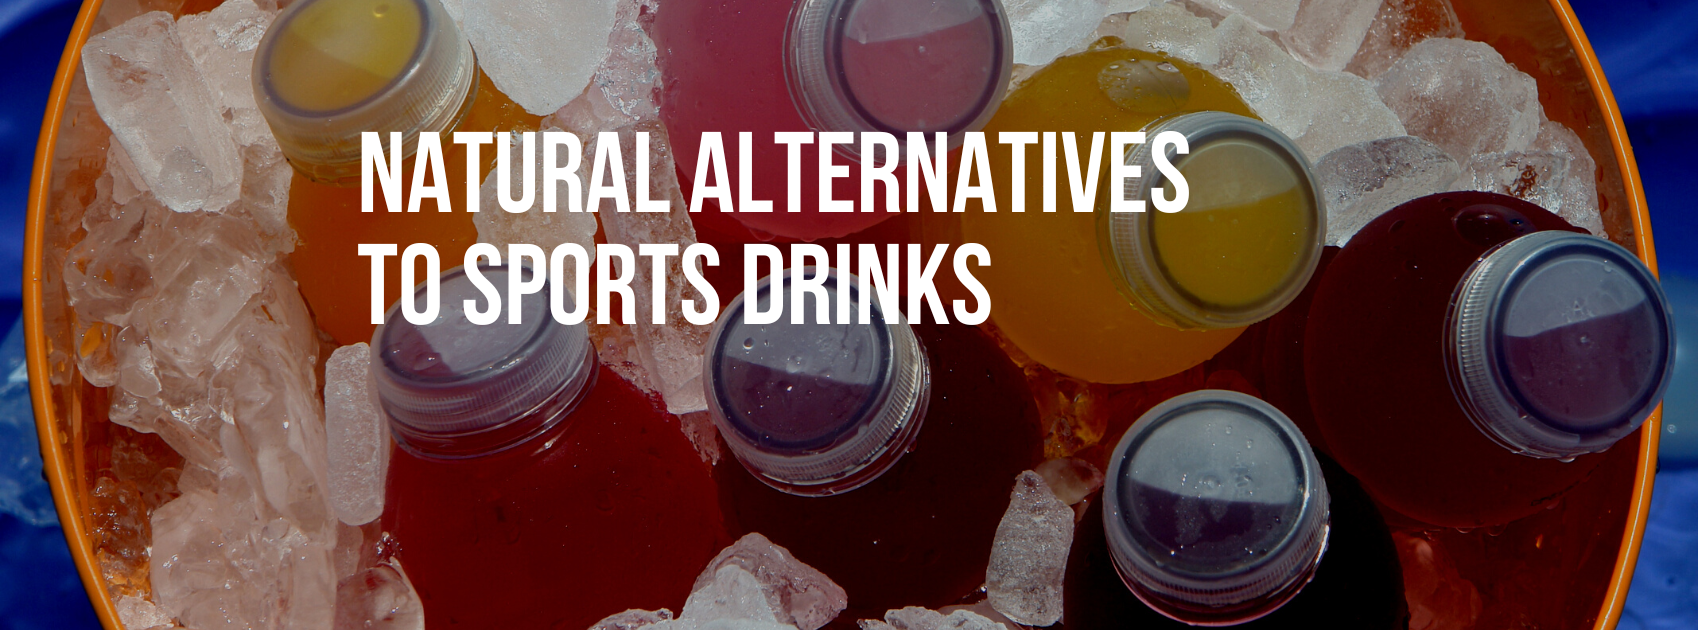 Natural Alternatives to Sports Drinks